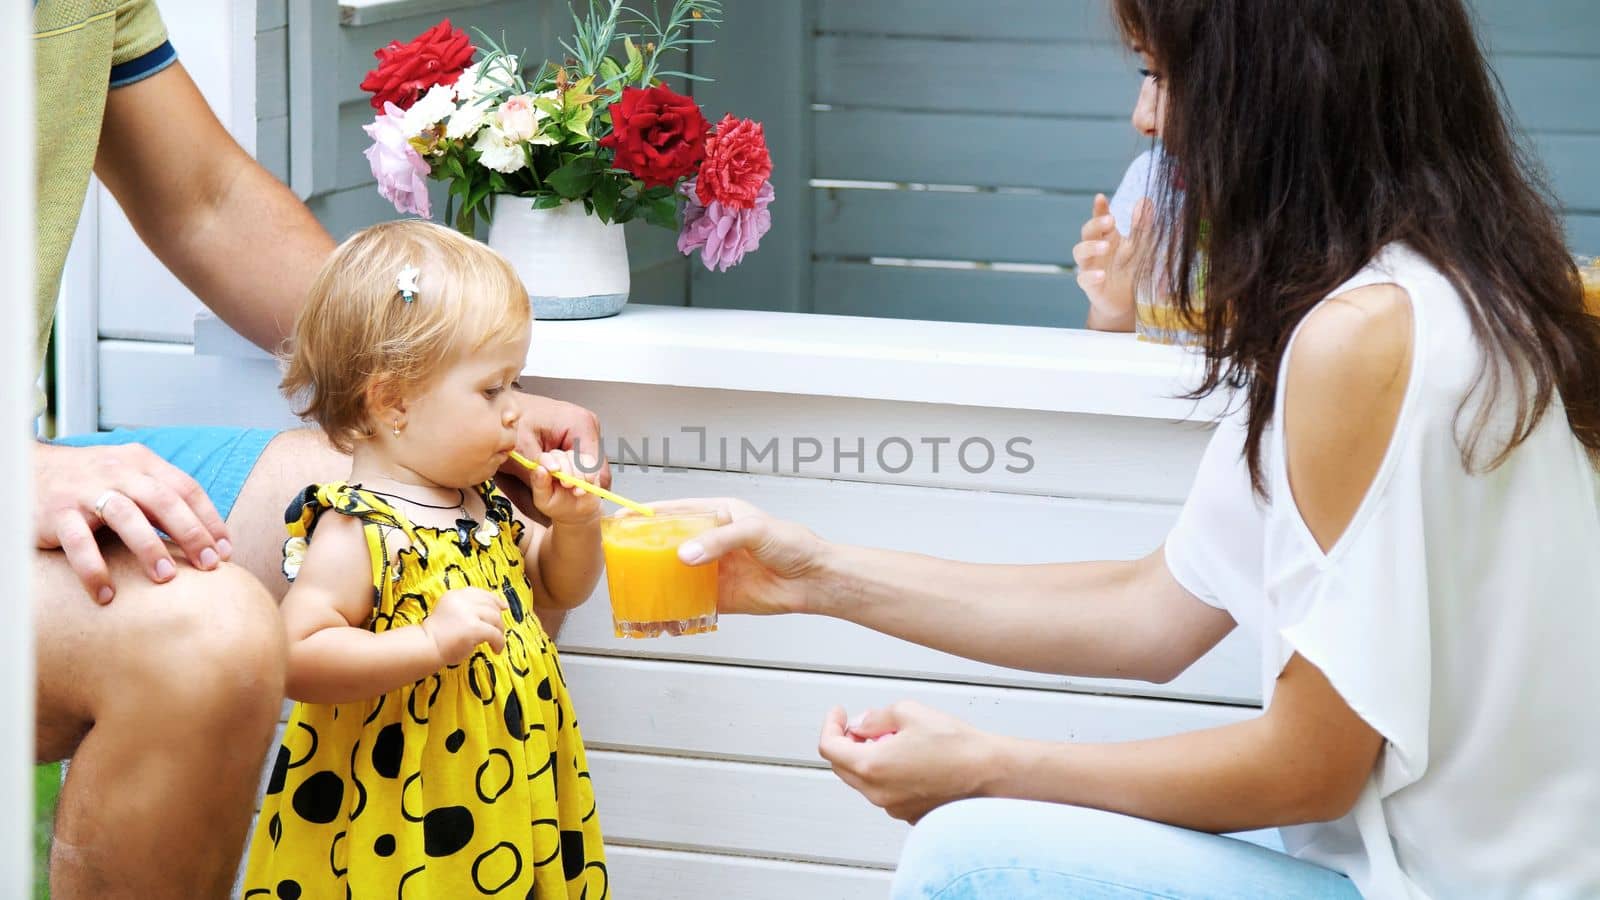 summer, in the garden, parents play with young children, a girl and a boy, in a cafe, in a children's play house, treat children with freshly squeezed fruit juices, drink juices. High quality photo